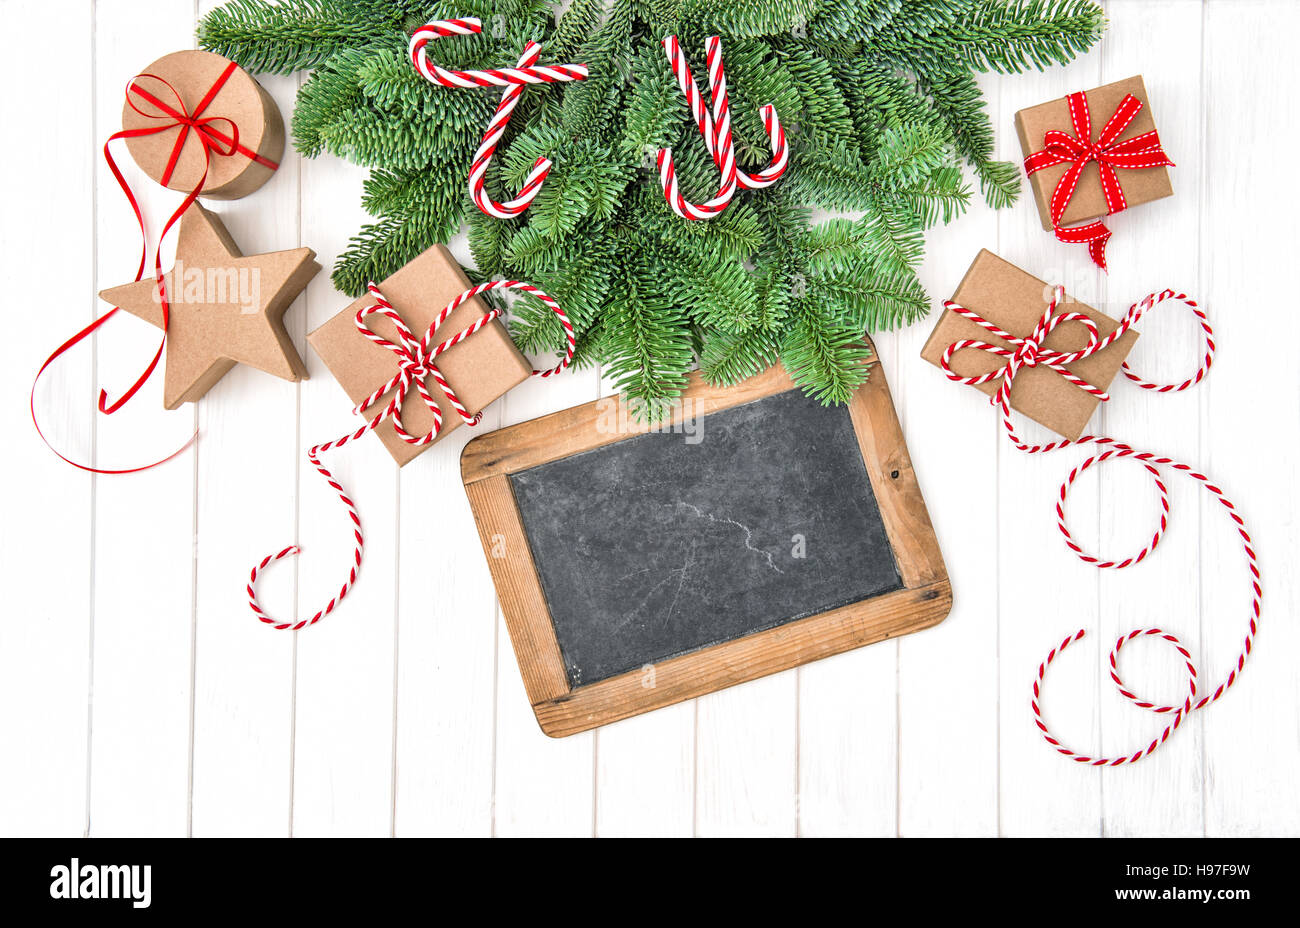 Christmas decoration with chalkboard and gifts. Christmas tree branches on bright wooden background Stock Photo